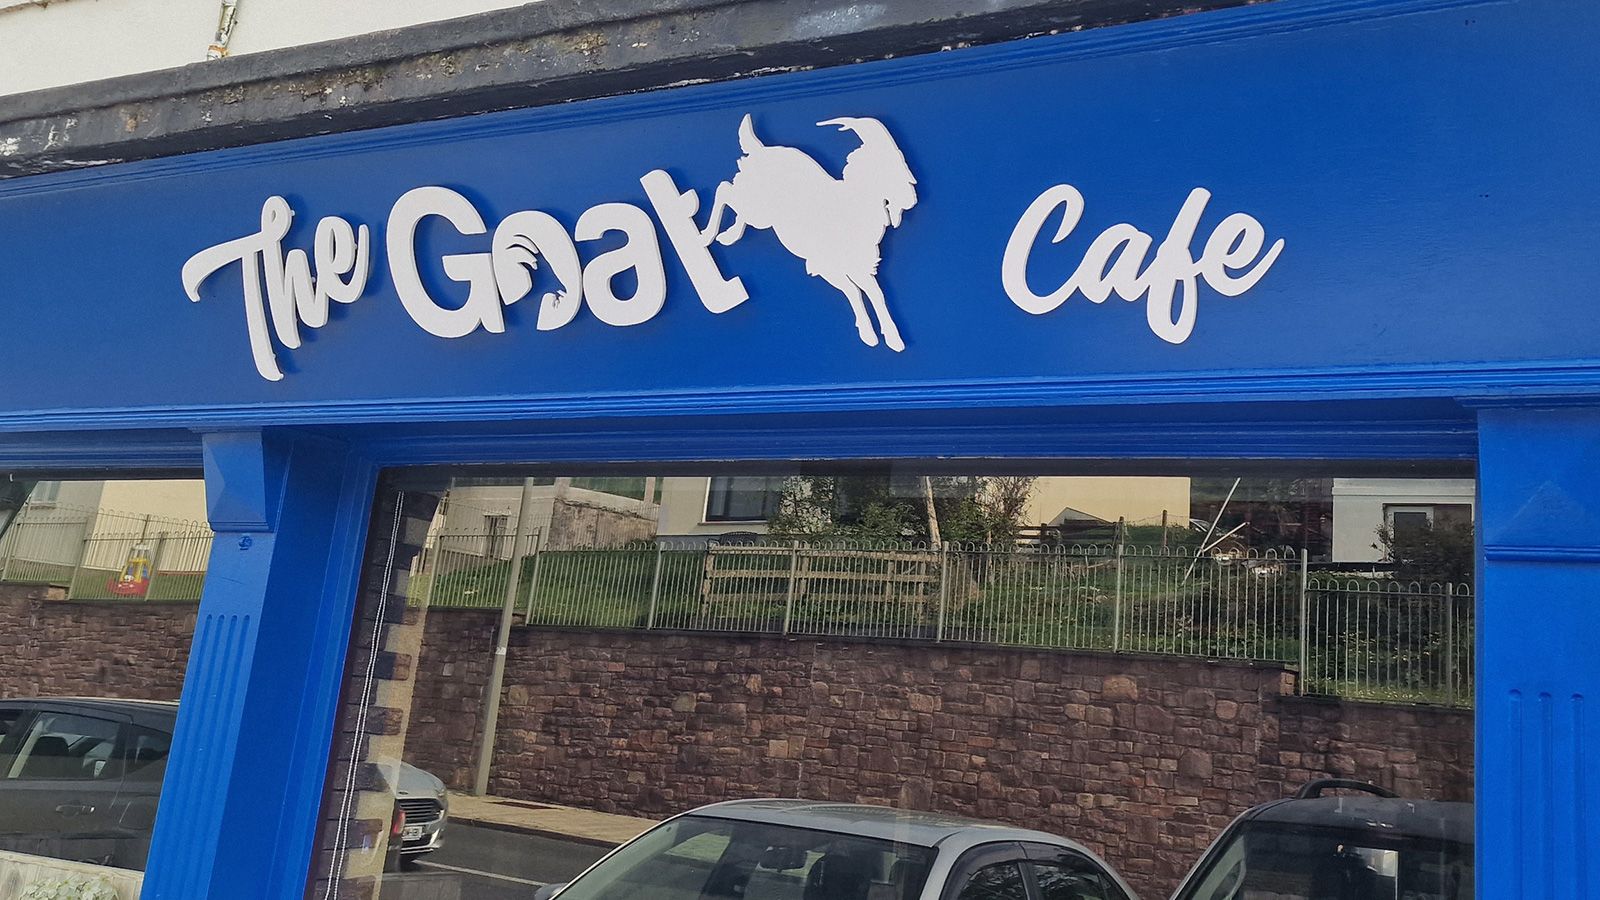 The Gout Cafe